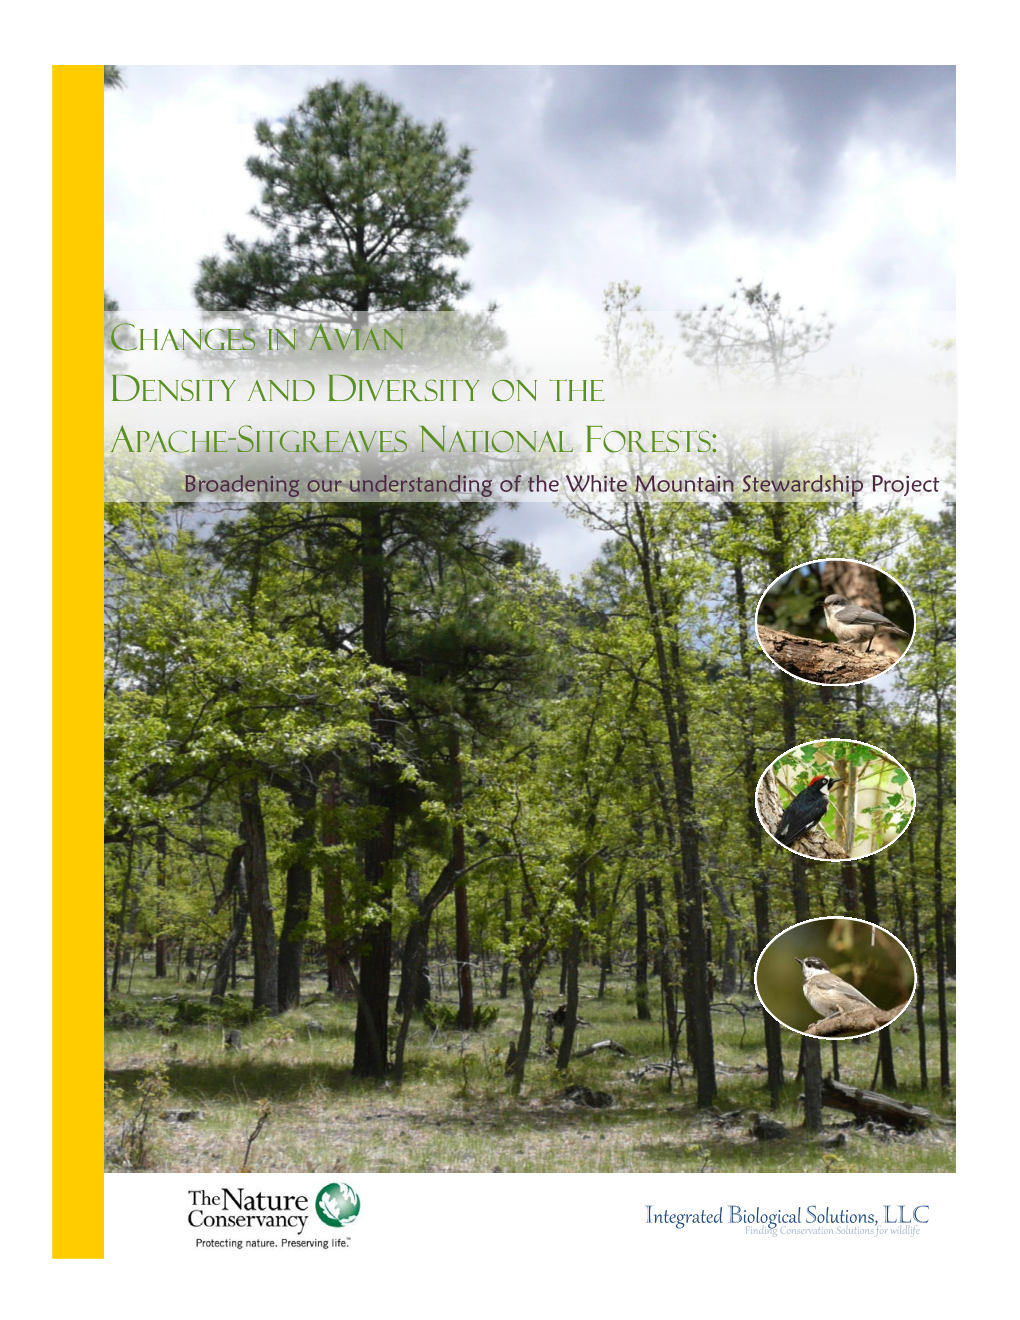 CHANGES in AVIAN DENSITY and DIVERSITY on the APACHE-SITGREAVES NATIONAL FORESTS: Broadening Our Understanding of the White Mountain Stewardship Project